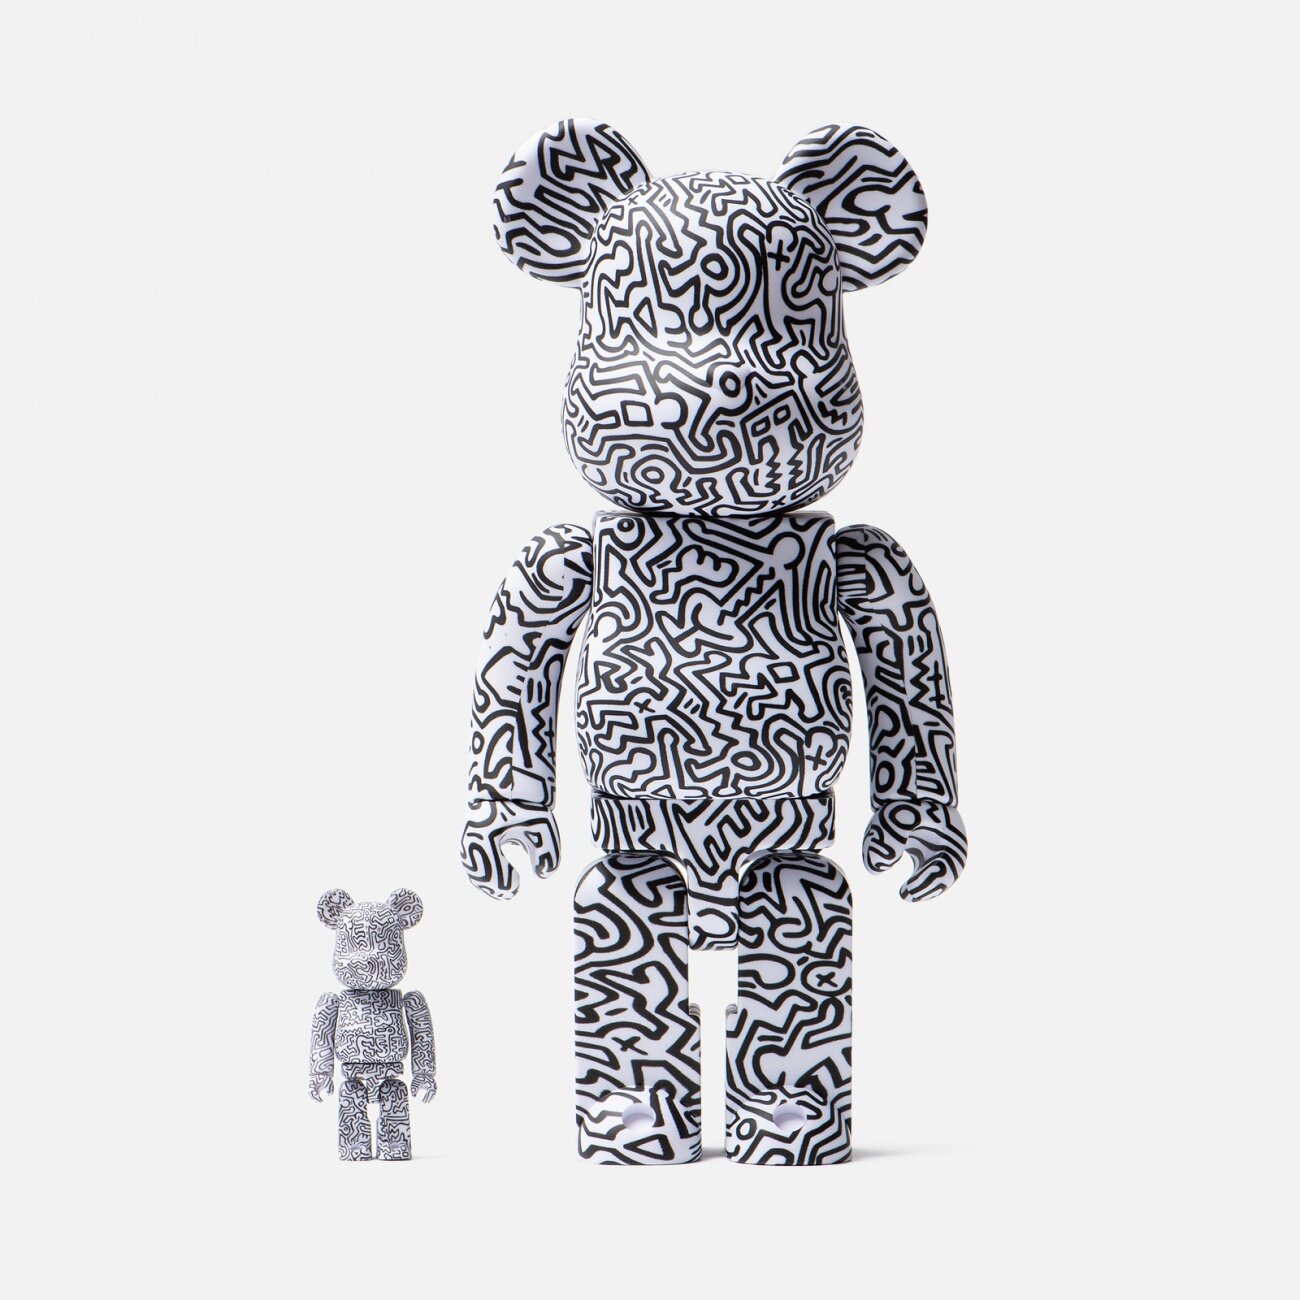 KEITH HARING 400% + 100% BLACK AND WHITE (VERSION 4) - BE@RBRICK 